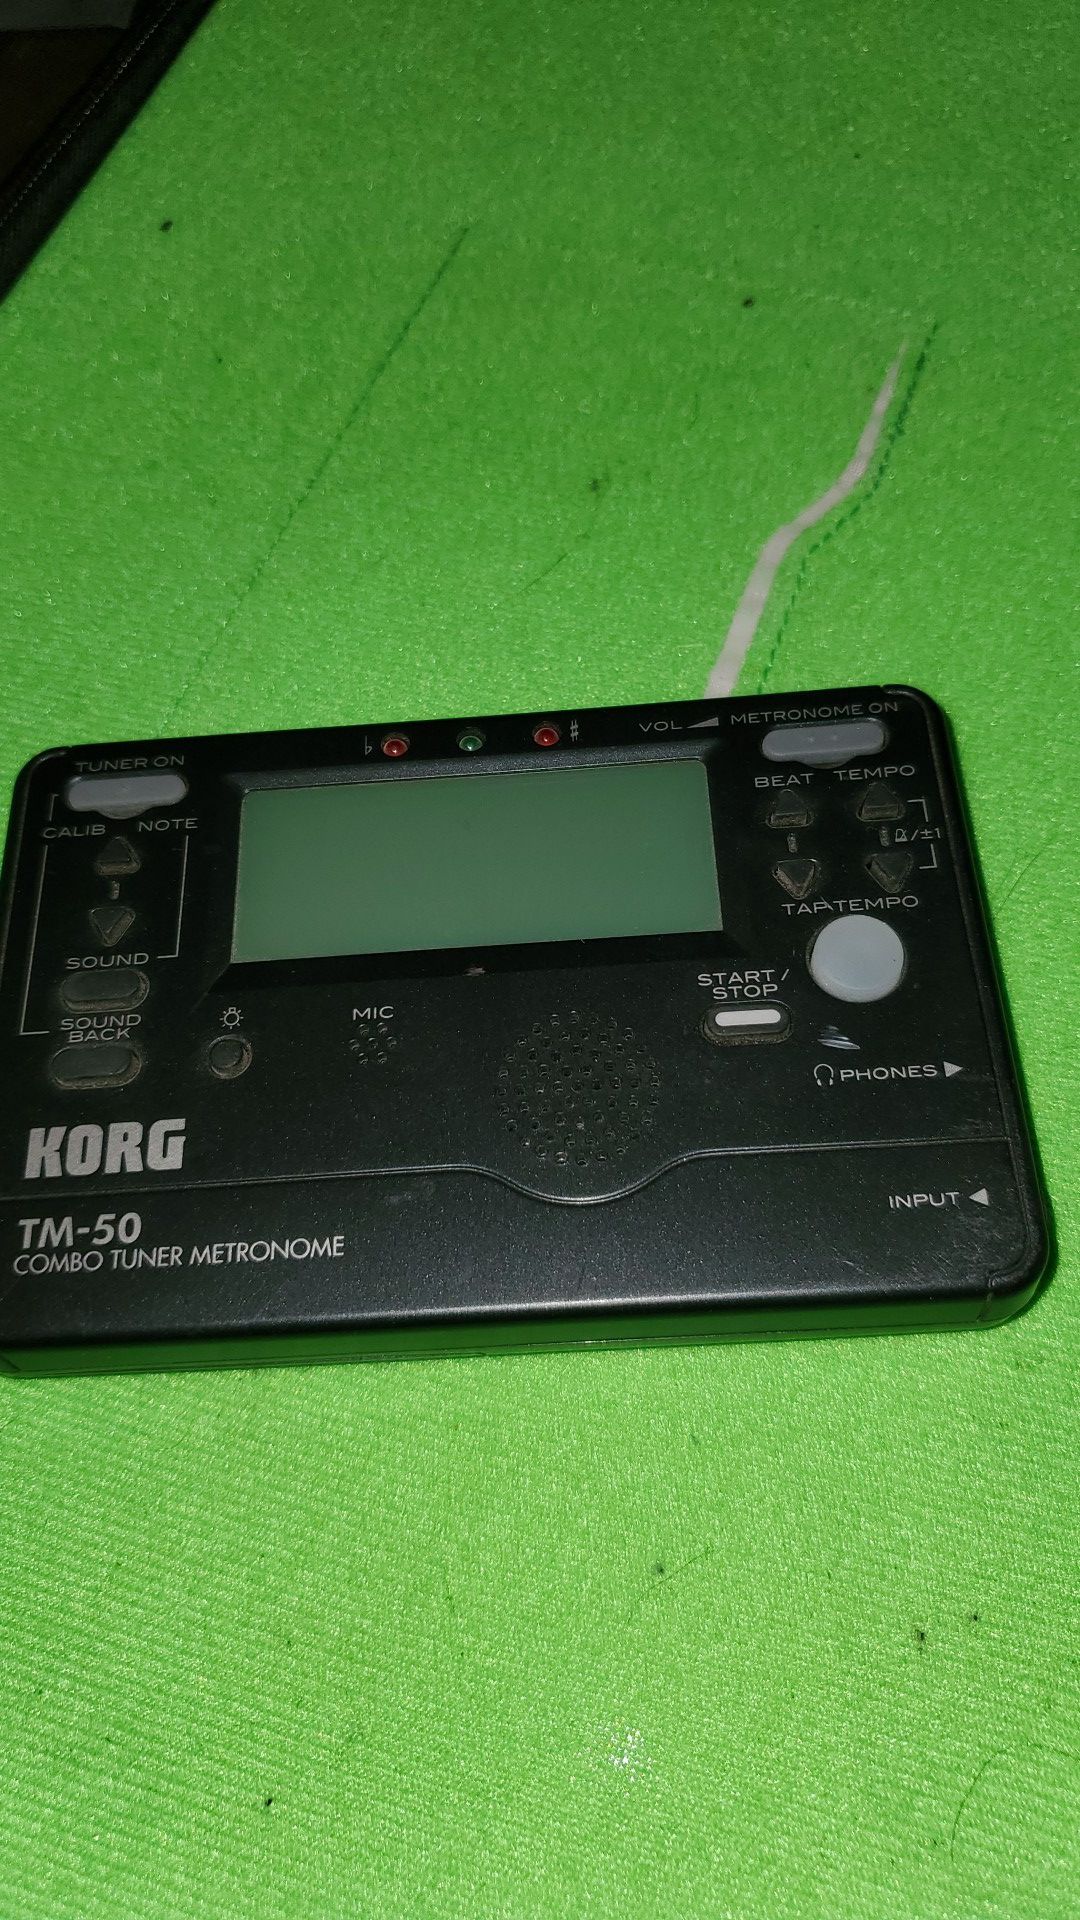 Korg tm-50 combo tuner metronome used great condition $15